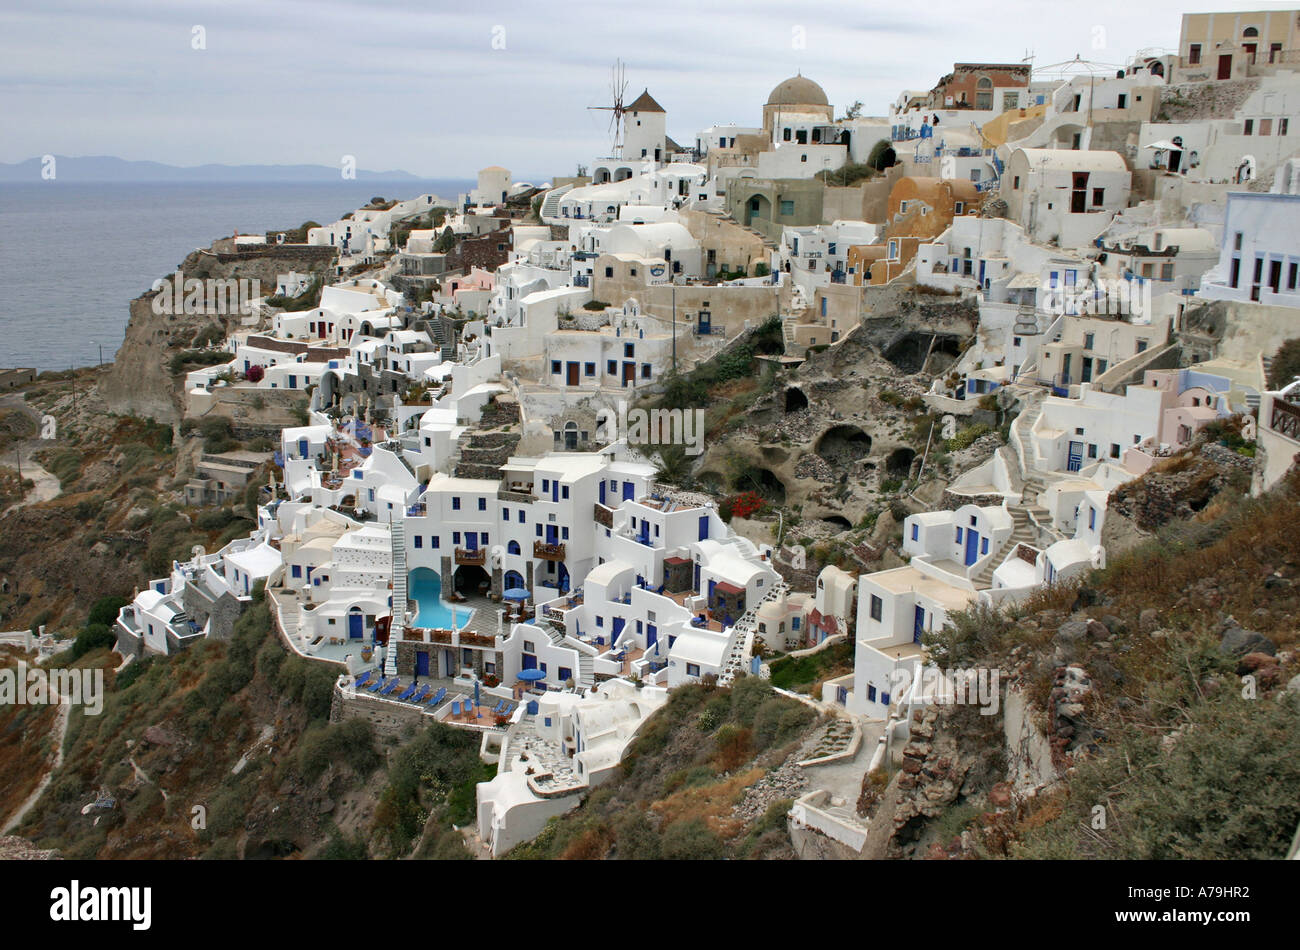 Oia Town: The pastel coloured boxy houses seemingly littered haphazardly spills down the slope of the upper town in Oia Stock Photo